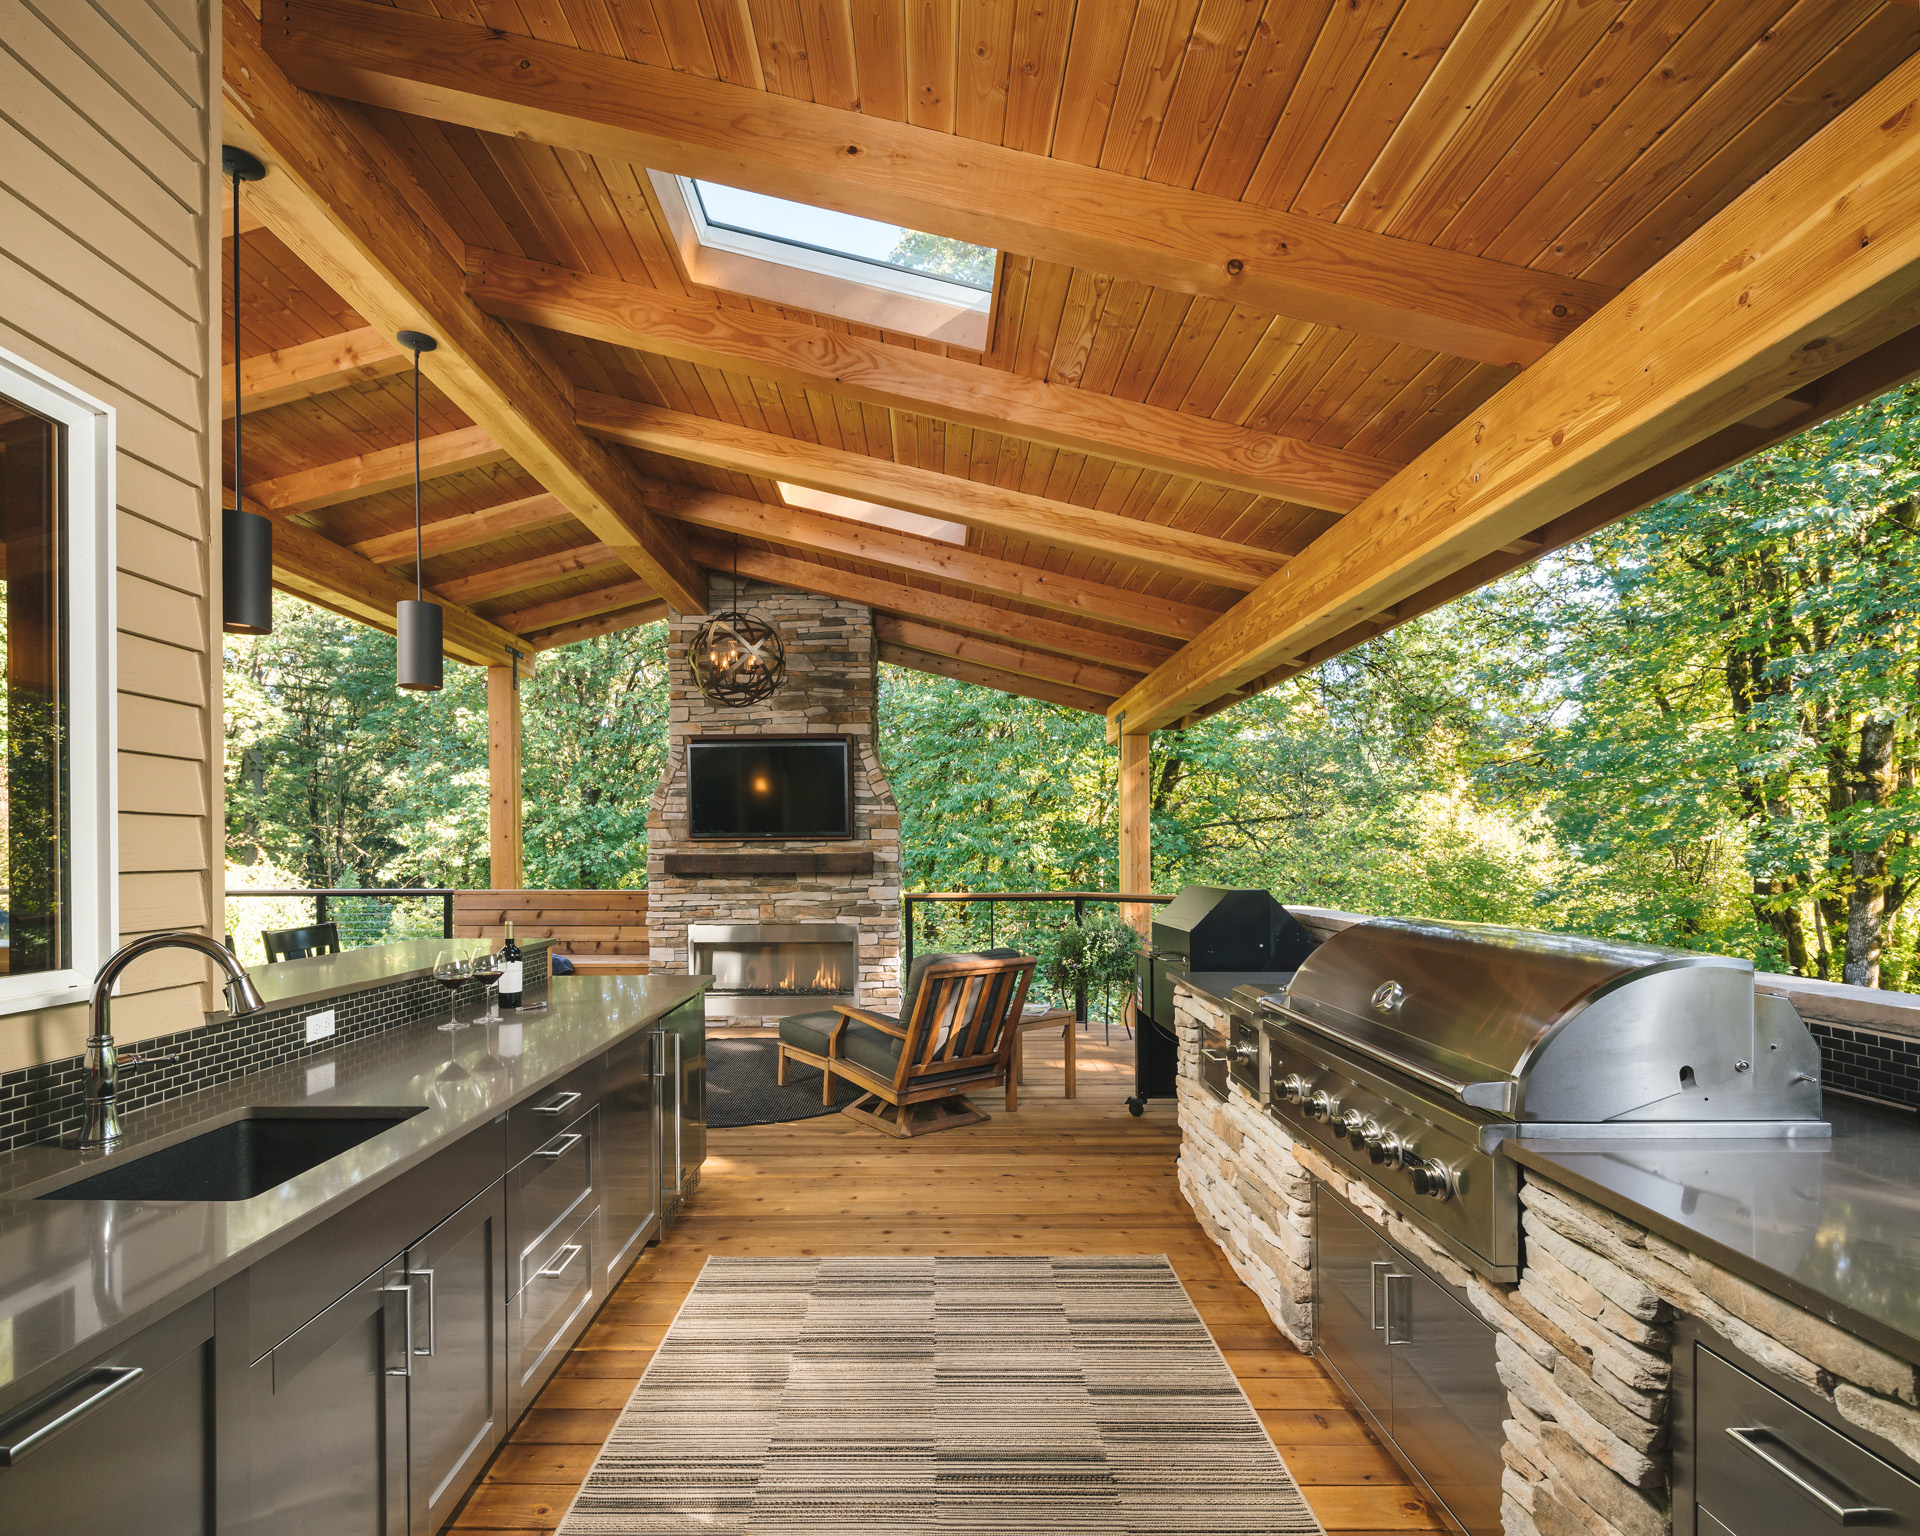 Outdoor entertainer's dream kitchen: A barbecue, bar and football on a  big-screen TV - oregonlive.com